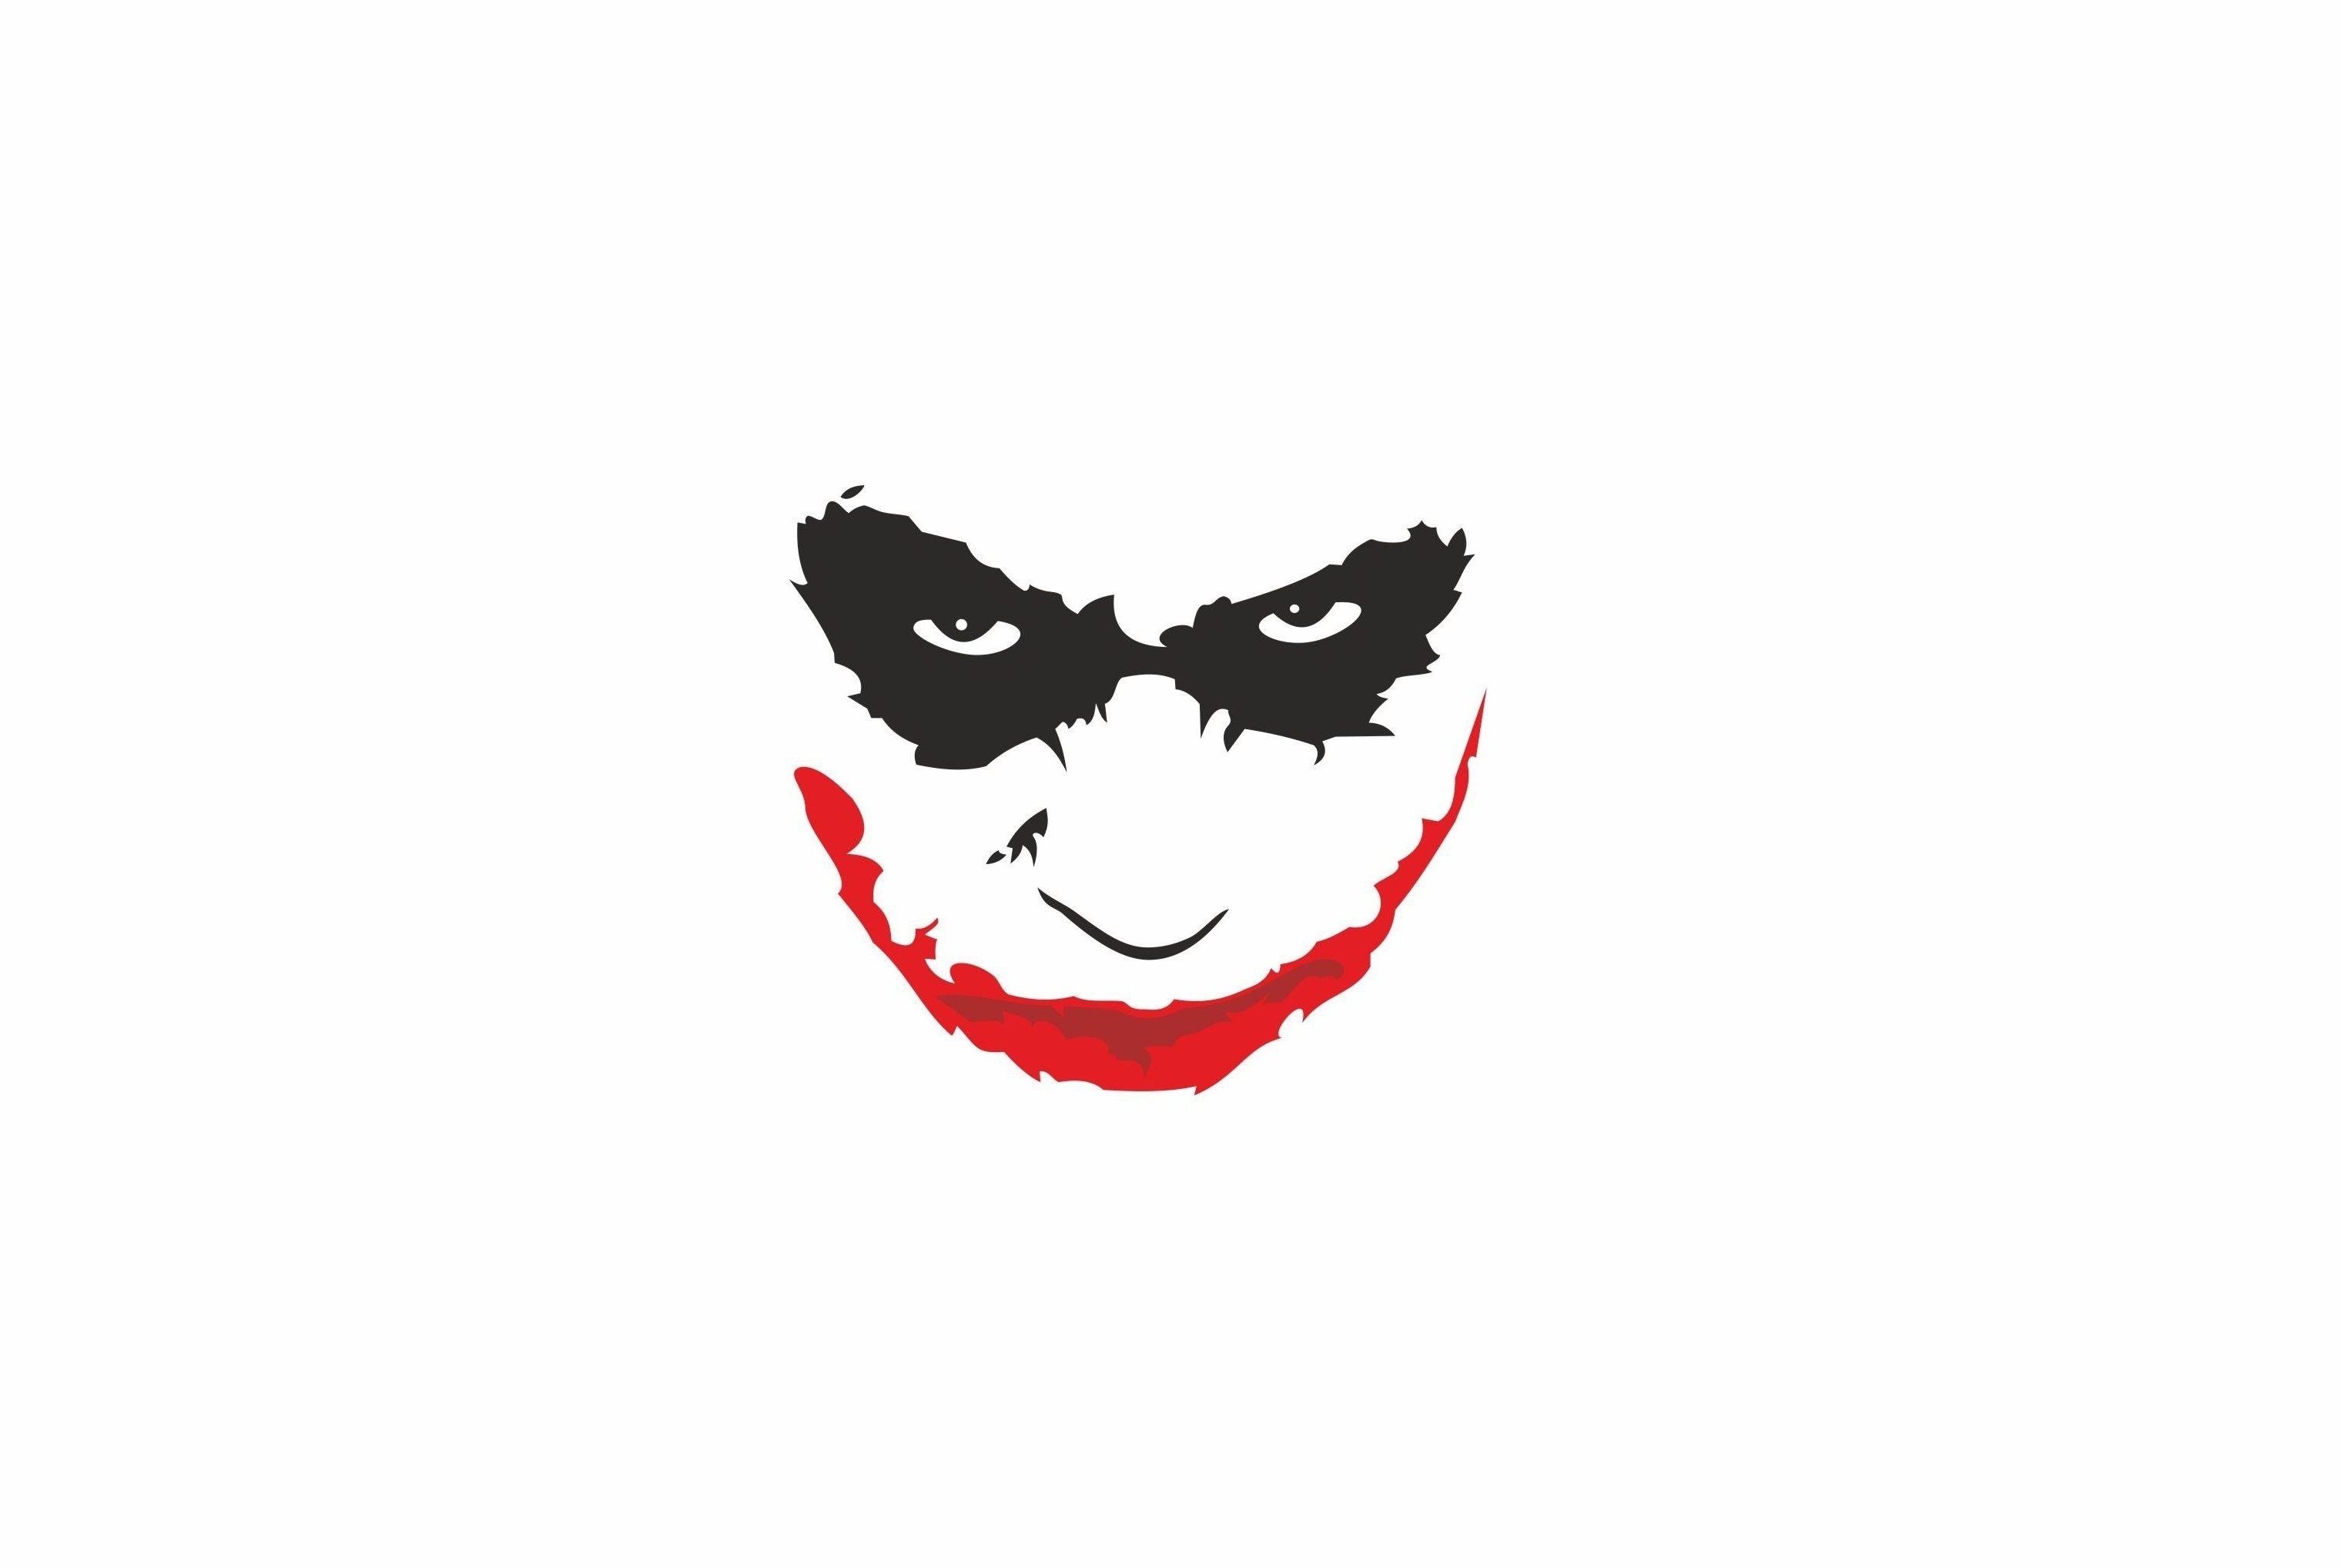 General 3040x2036 Joker red black eyes abstract face movies digital art simple background smiling